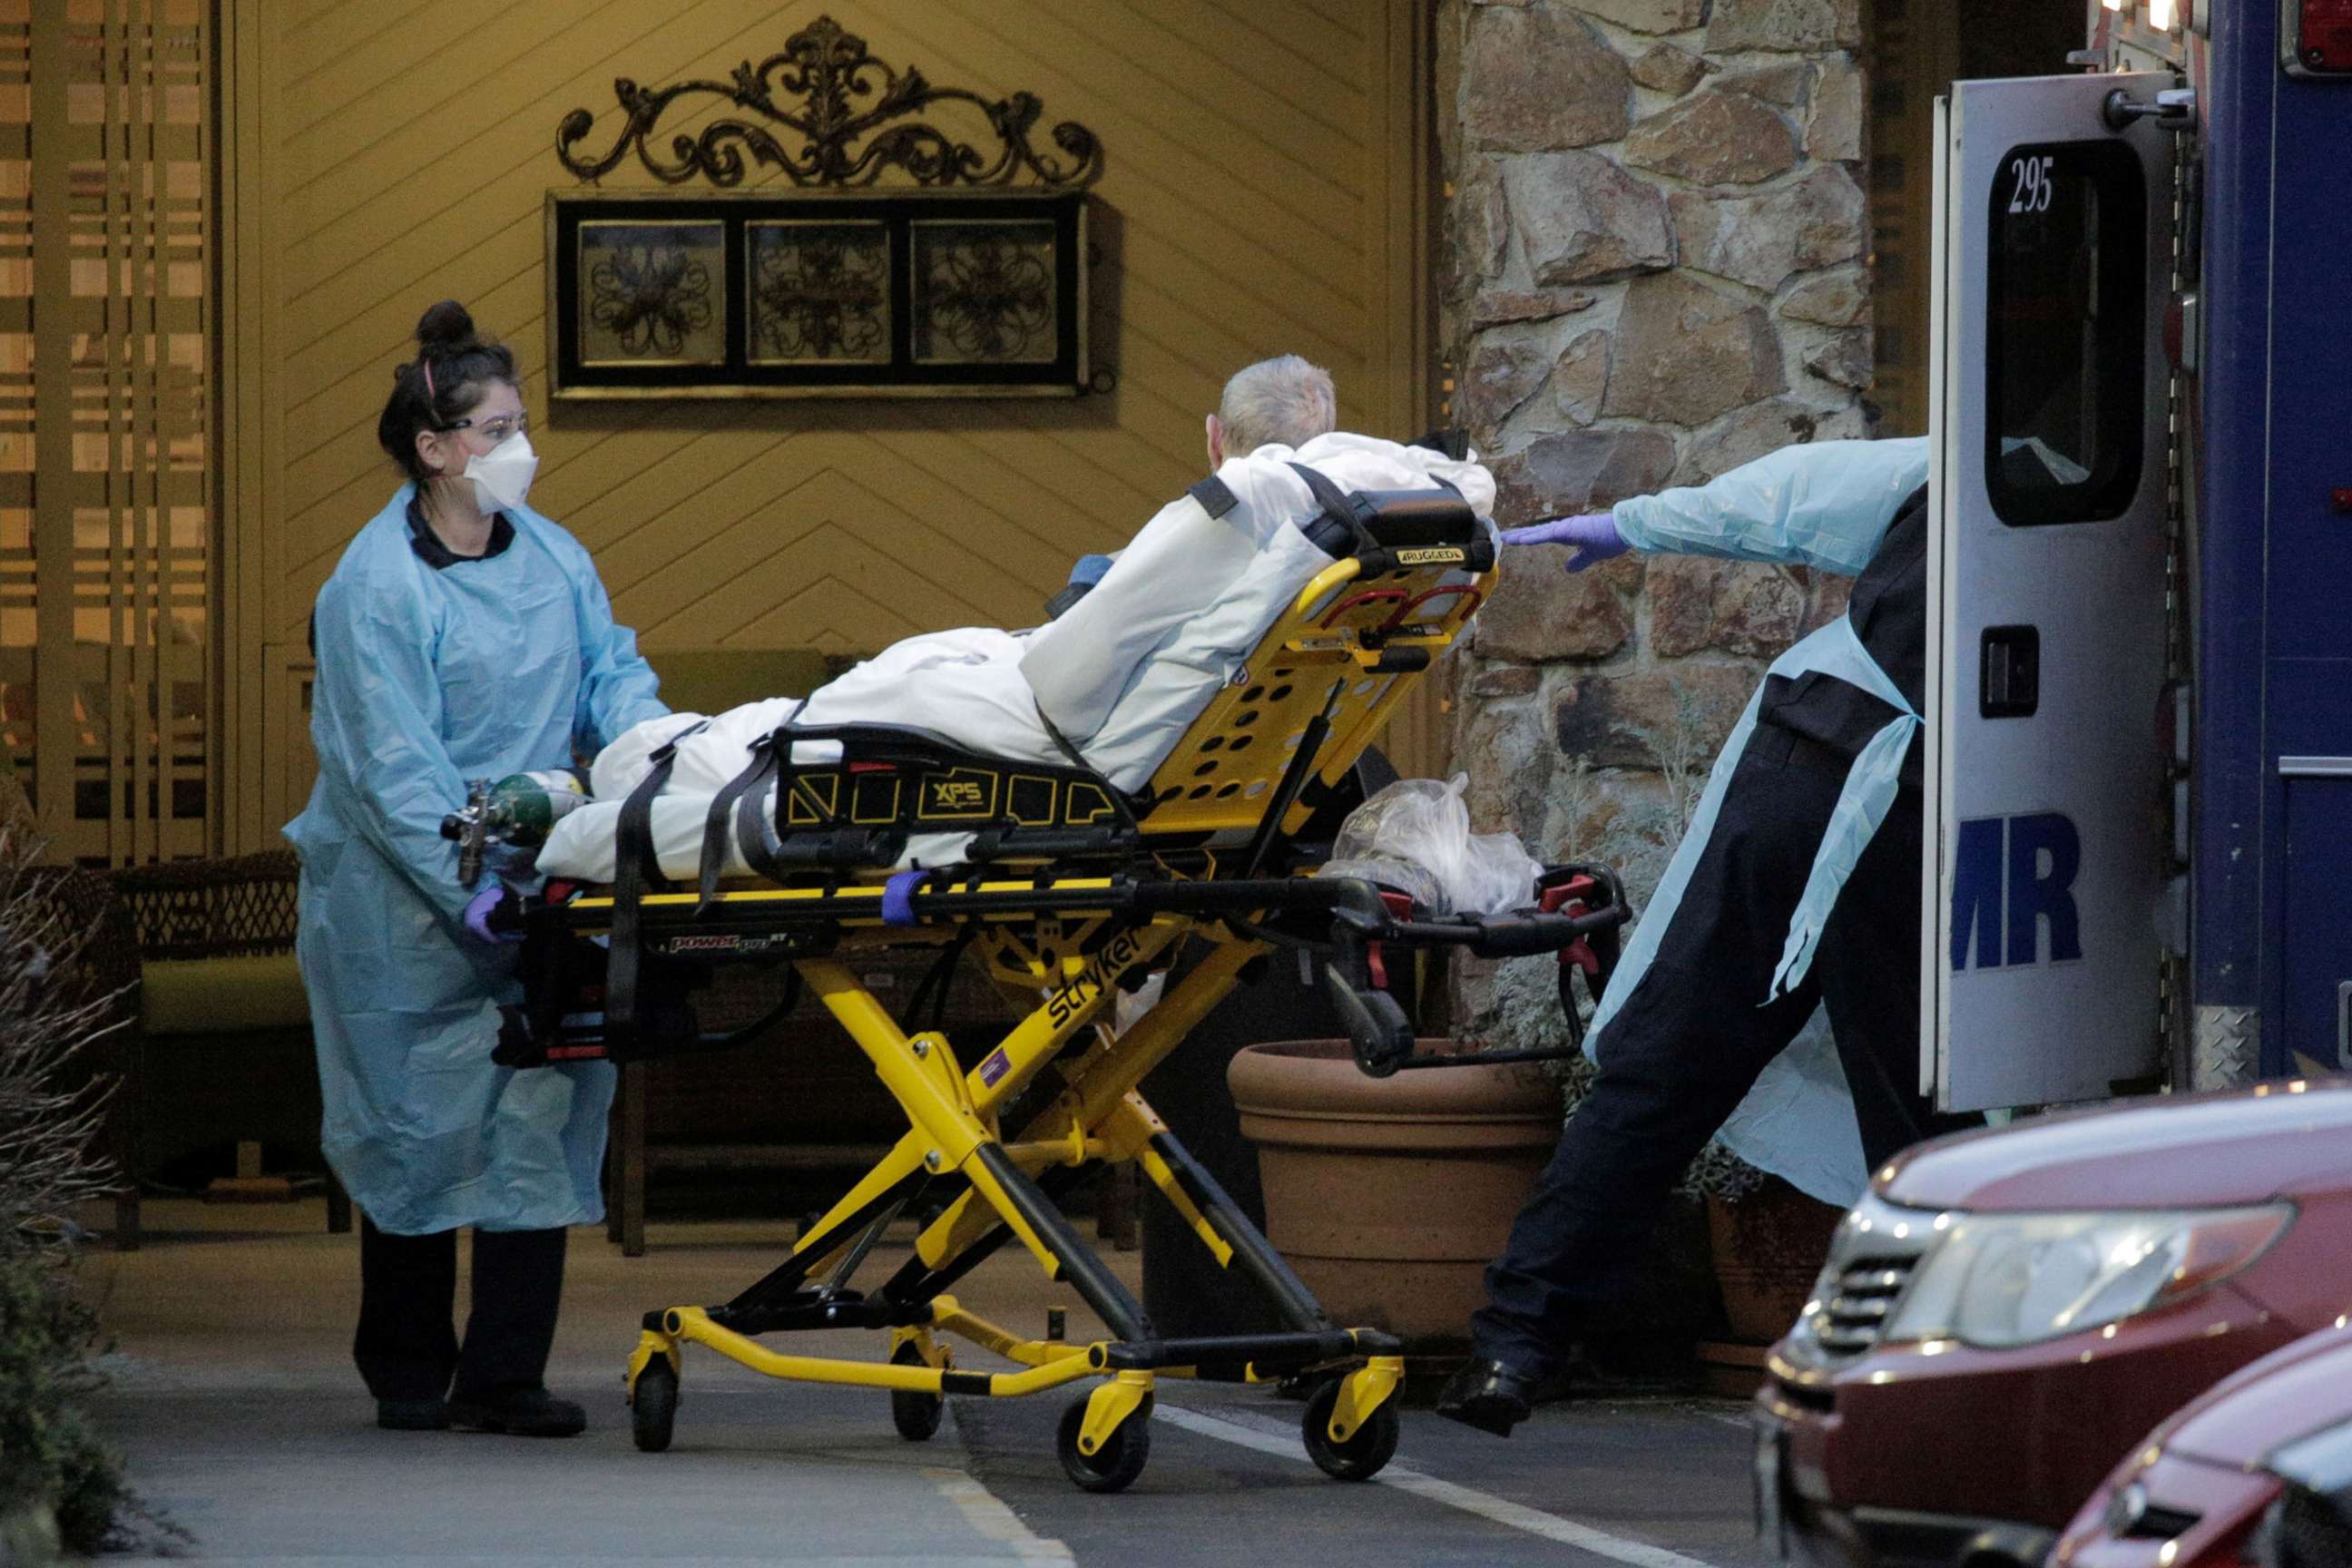 PHOTO: Medics transport a patient into an ambulance at the Life Care Center of Kirkland, the long-term care facility linked to several confirmed coronavirus cases in the state, in Kirkland, Washington, March 10, 2020. 